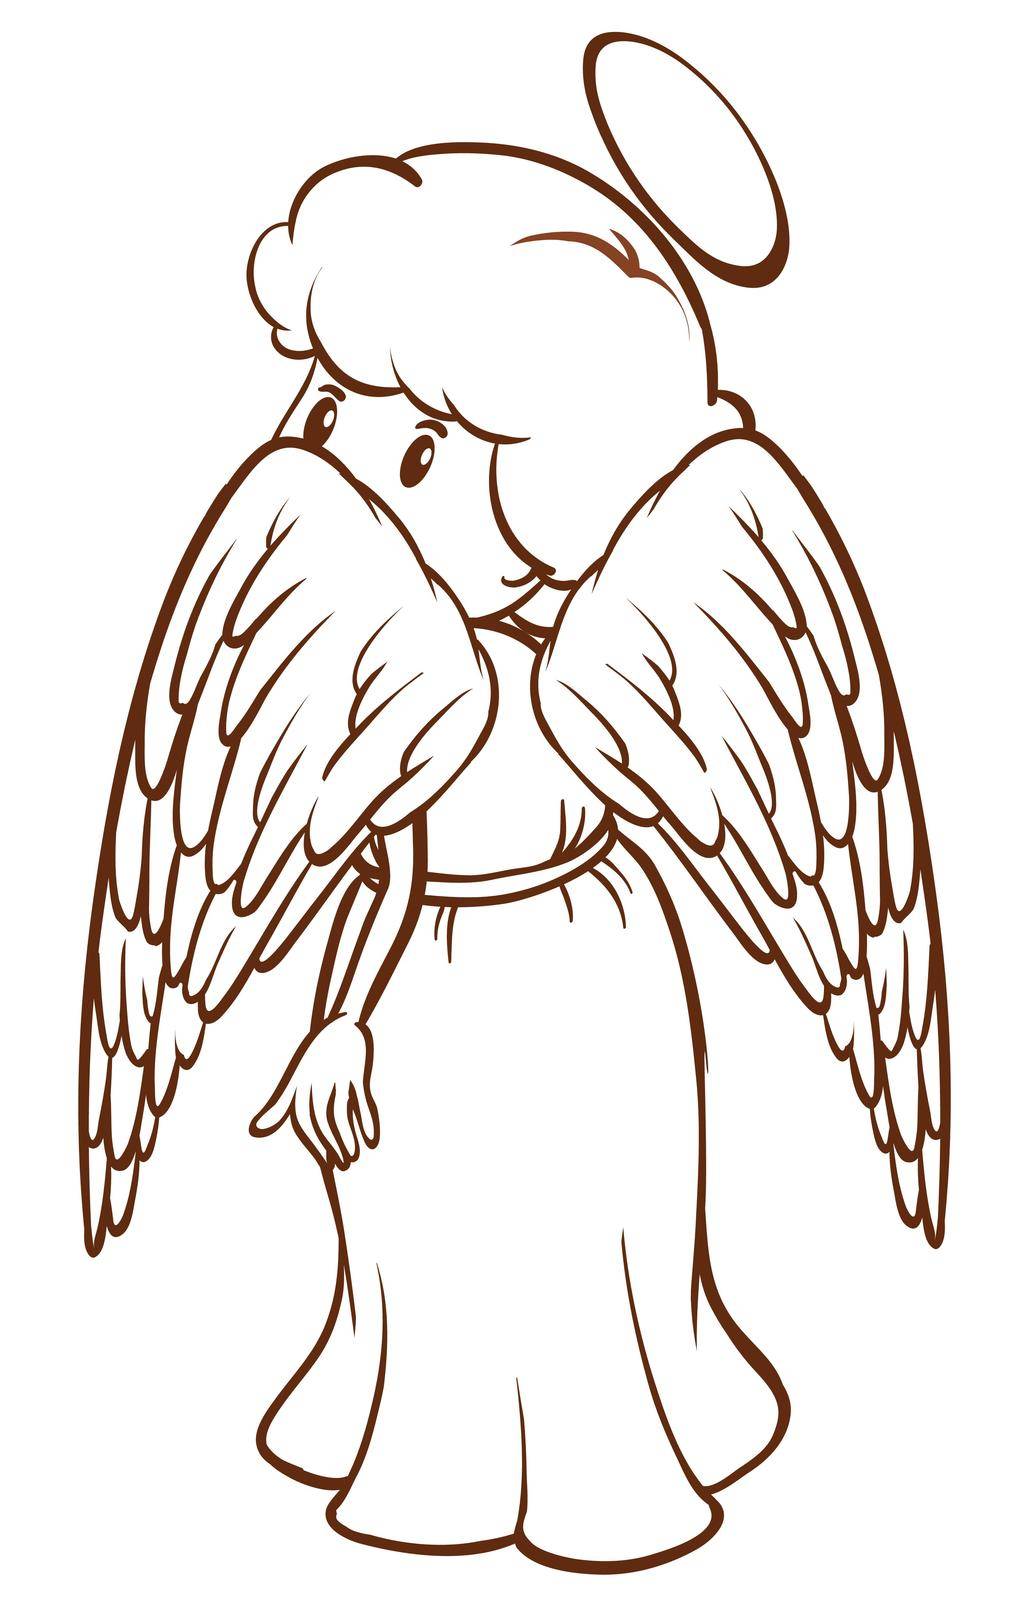 A plain sketch of an angel by iimages